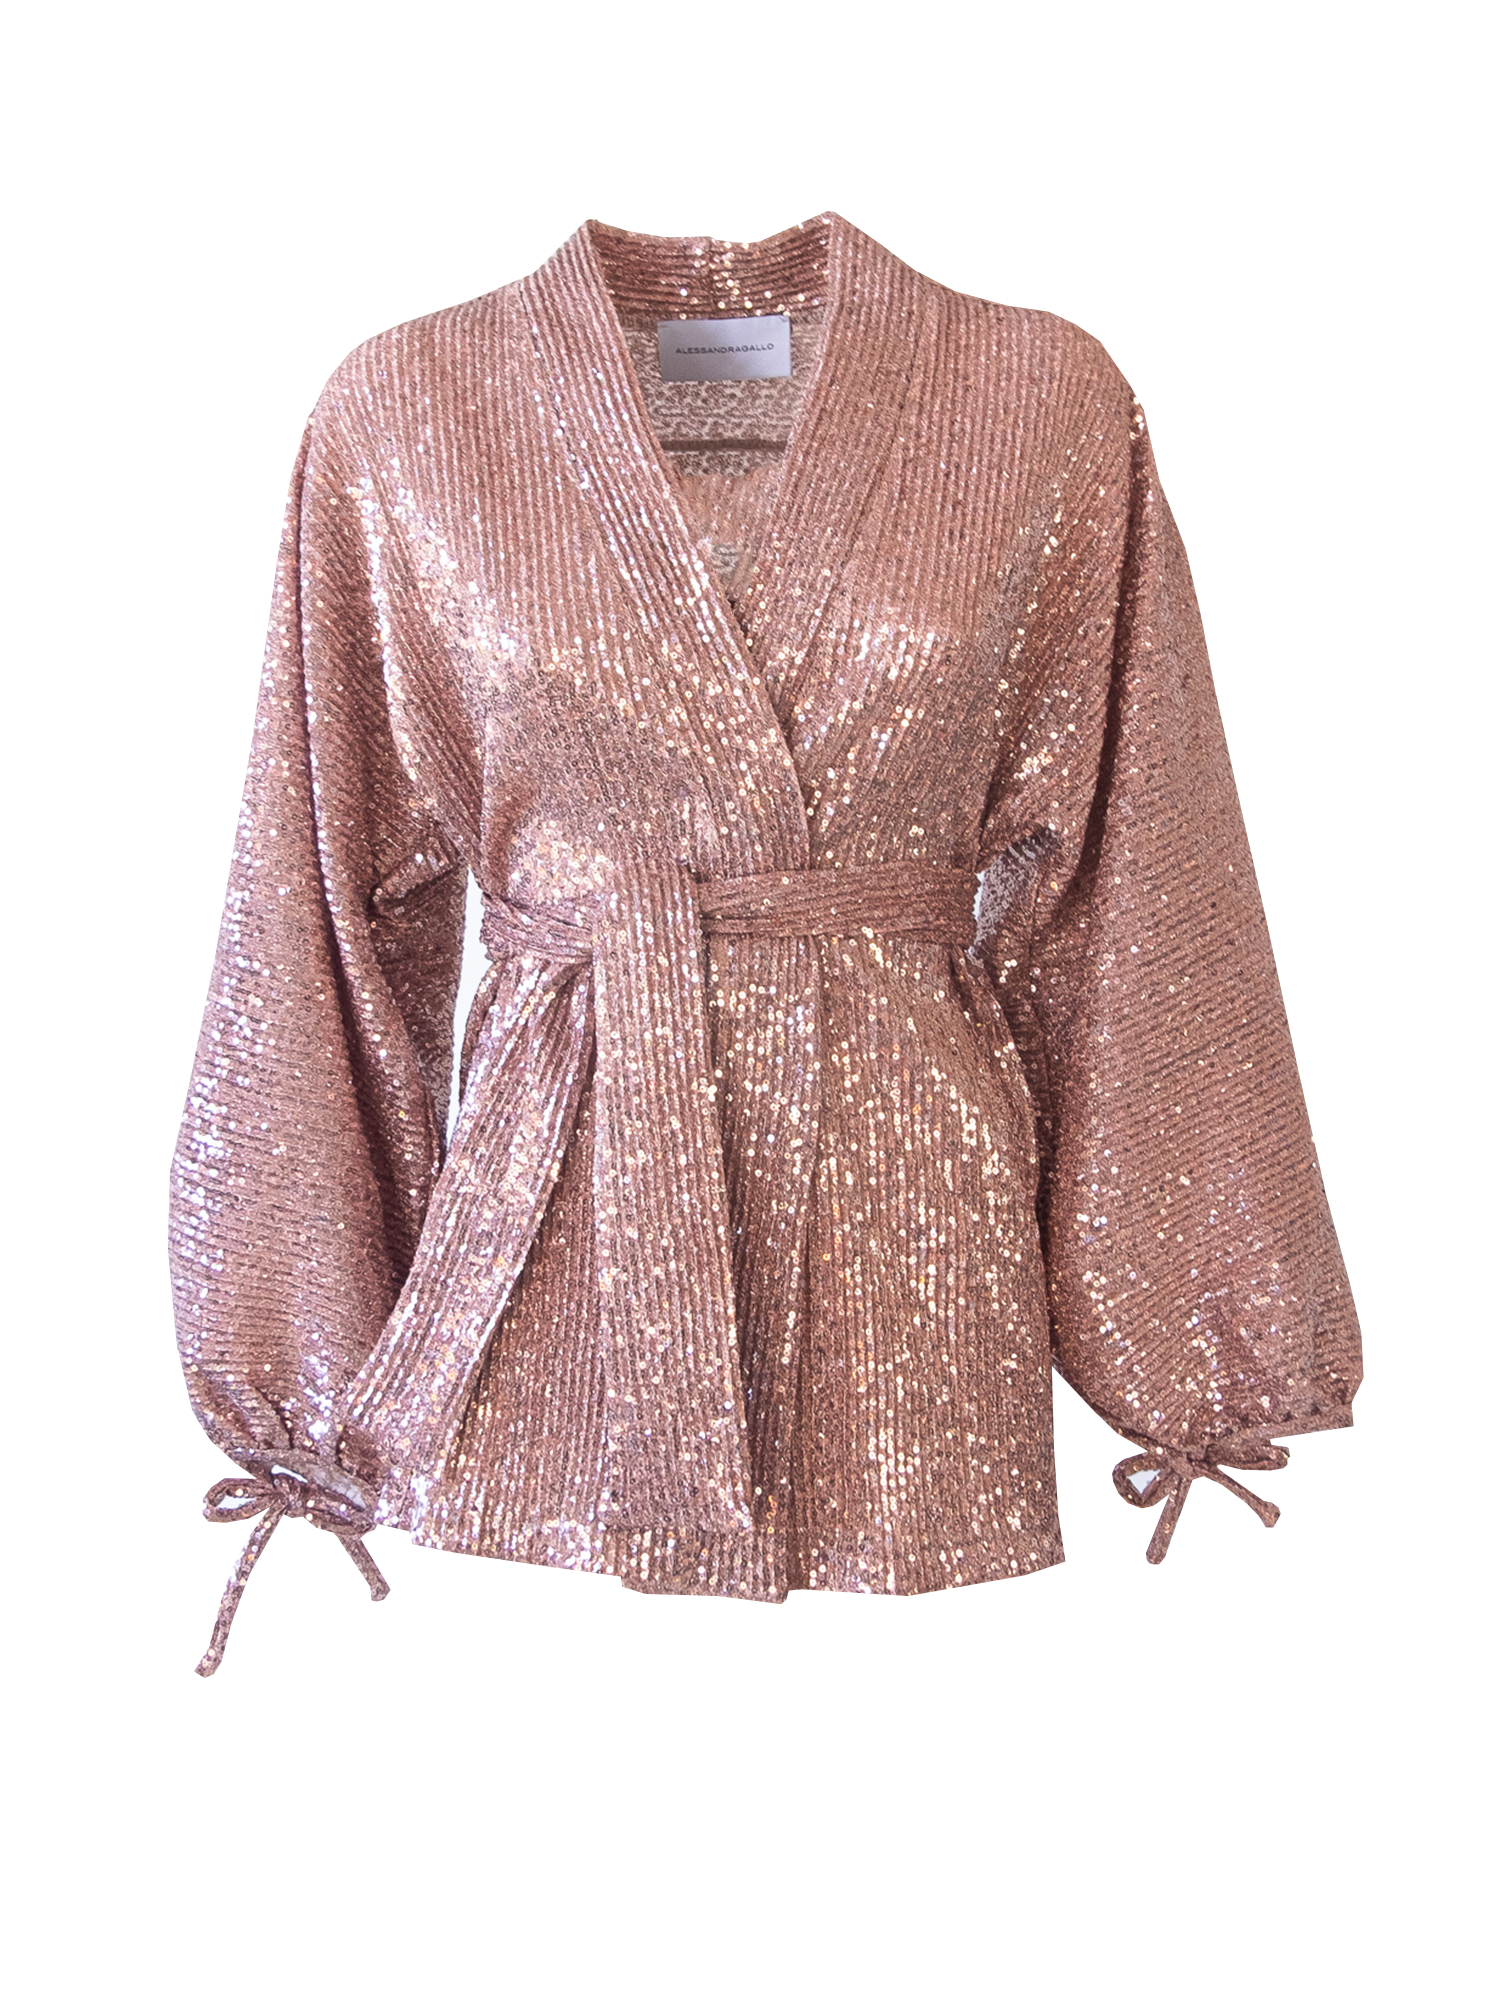 AMELIA - shirt with wide sleeves and sash in pink sequins